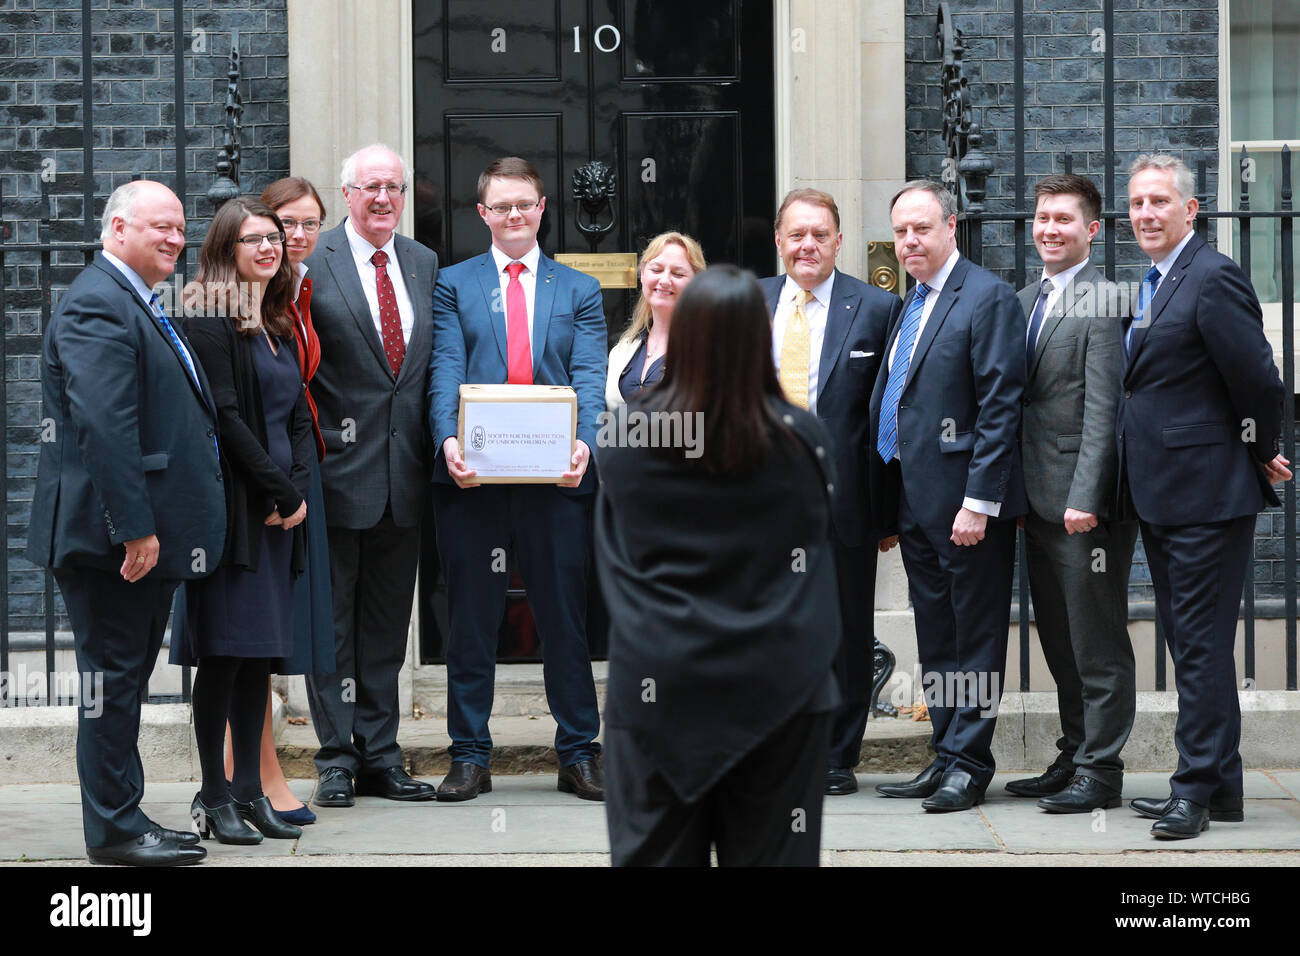 Westminster, London, 11th Sep 2019.  Nigel Dodds, Leader of the DUP in the House of Commons, with DUP colleagues including Ian Paisley Jr. and David Simpson, together with the 'Society for the Protection of Unborn Children' hands in a Pro-Life petition at No 10 Downing Street this afternoon. Credit: Imageplotter/Alamy Live News Stock Photo